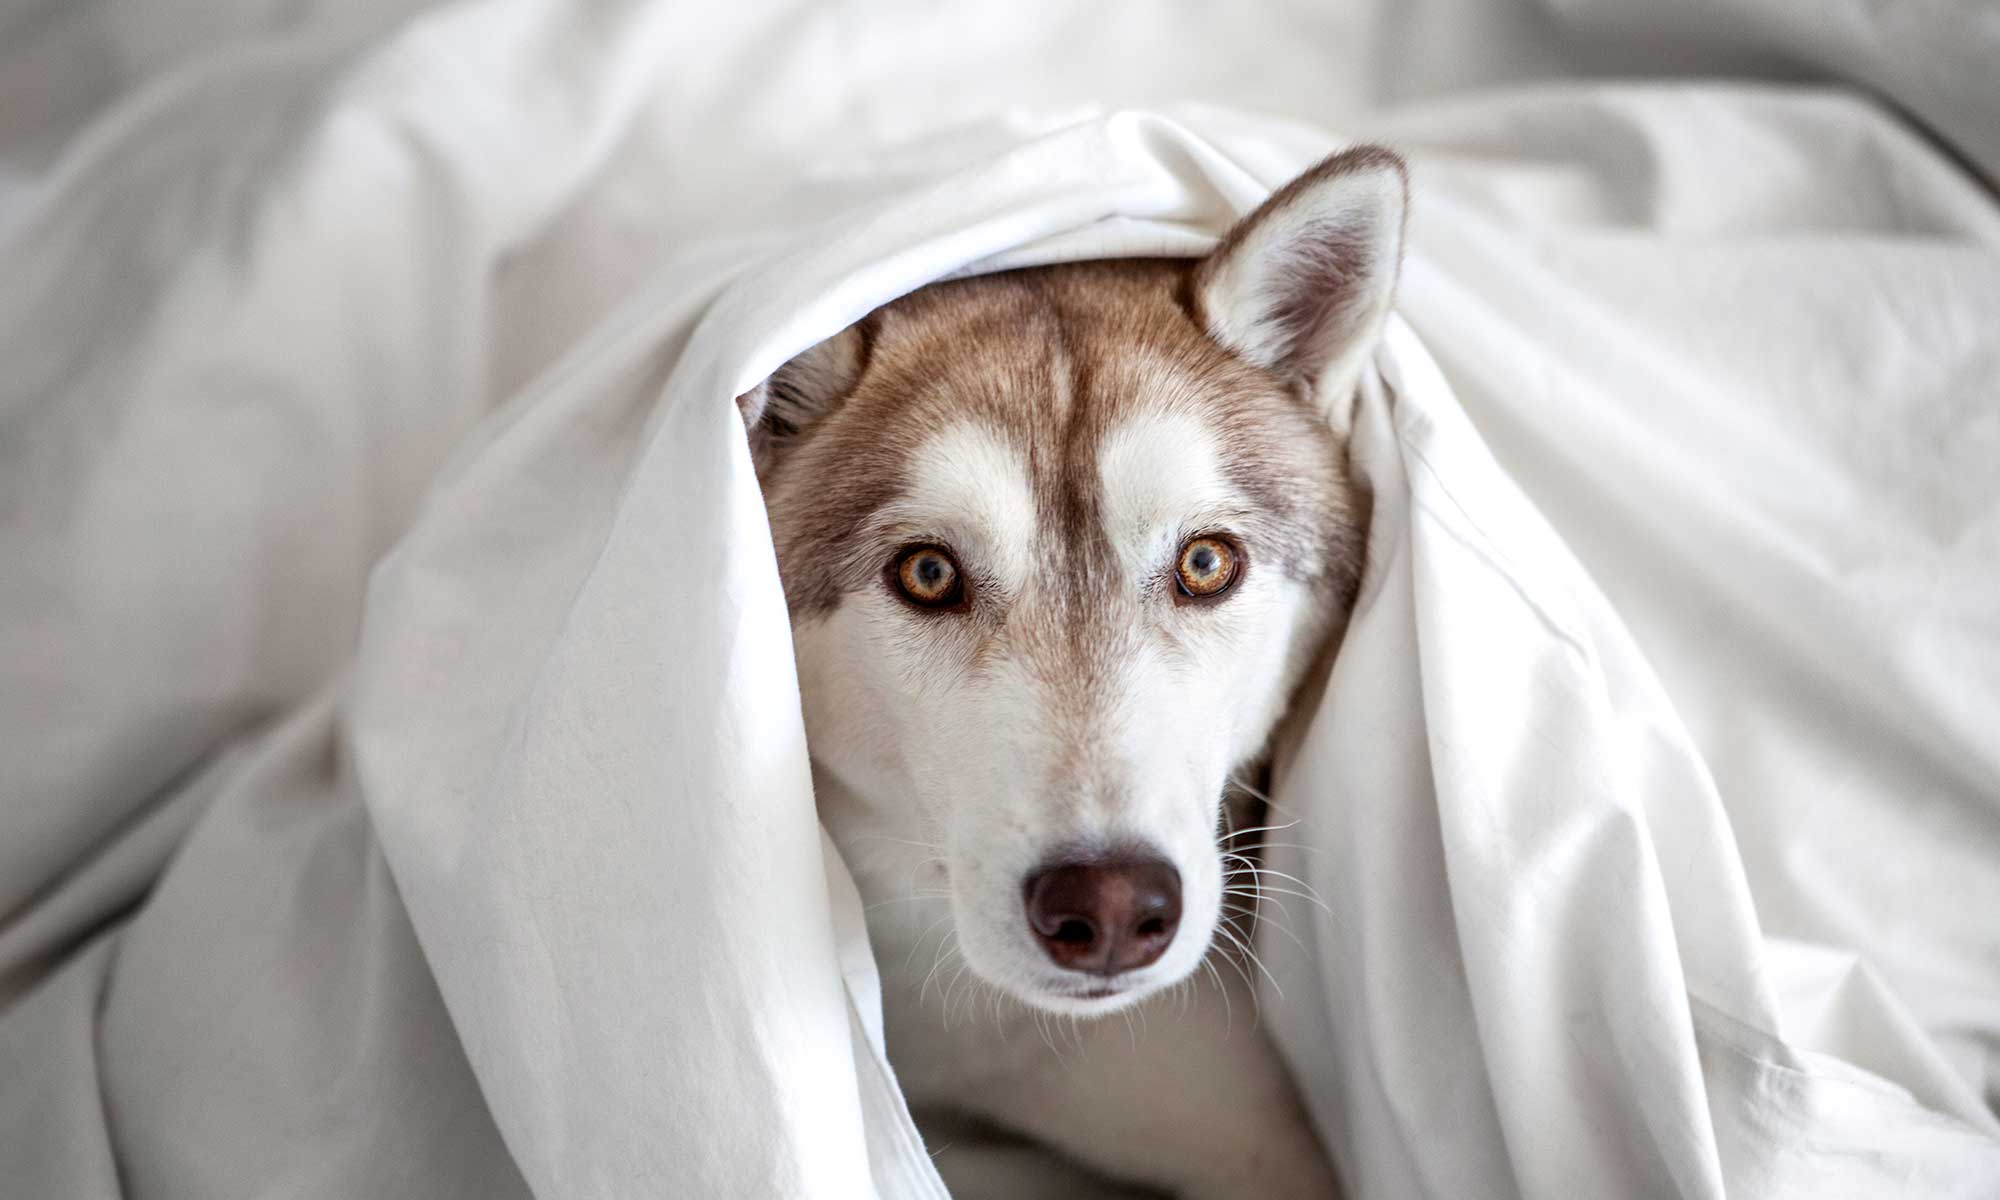 A husky wrapped up in sheets on a bed